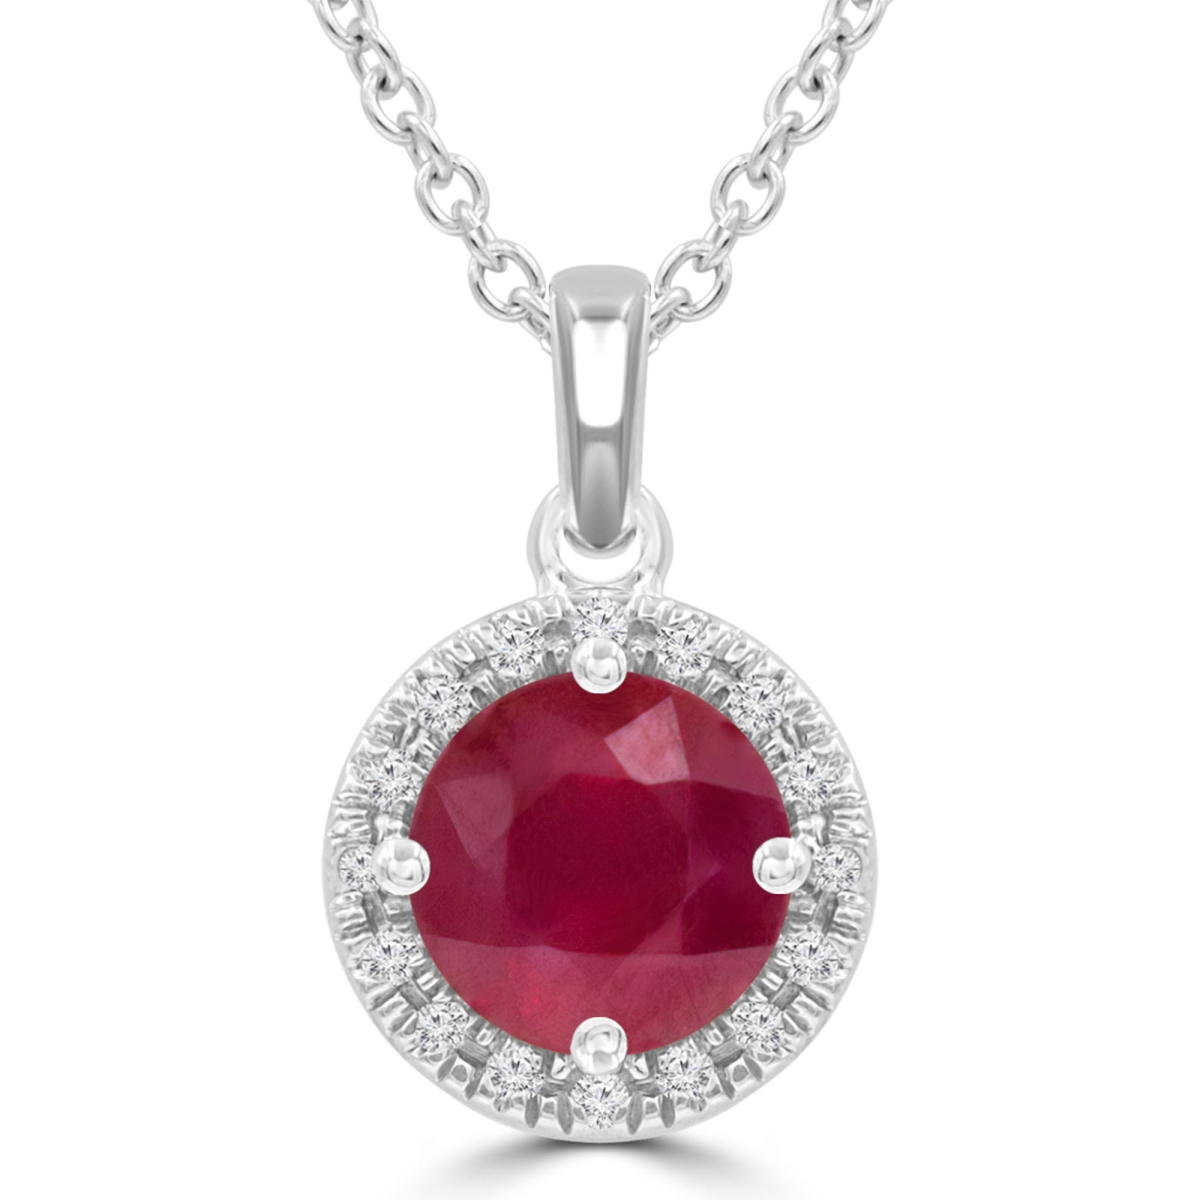 Picture of Majesty Diamonds MDR220189 1.4 CTW Round Red Ruby Halo Pendant Necklace in 14K White Gold